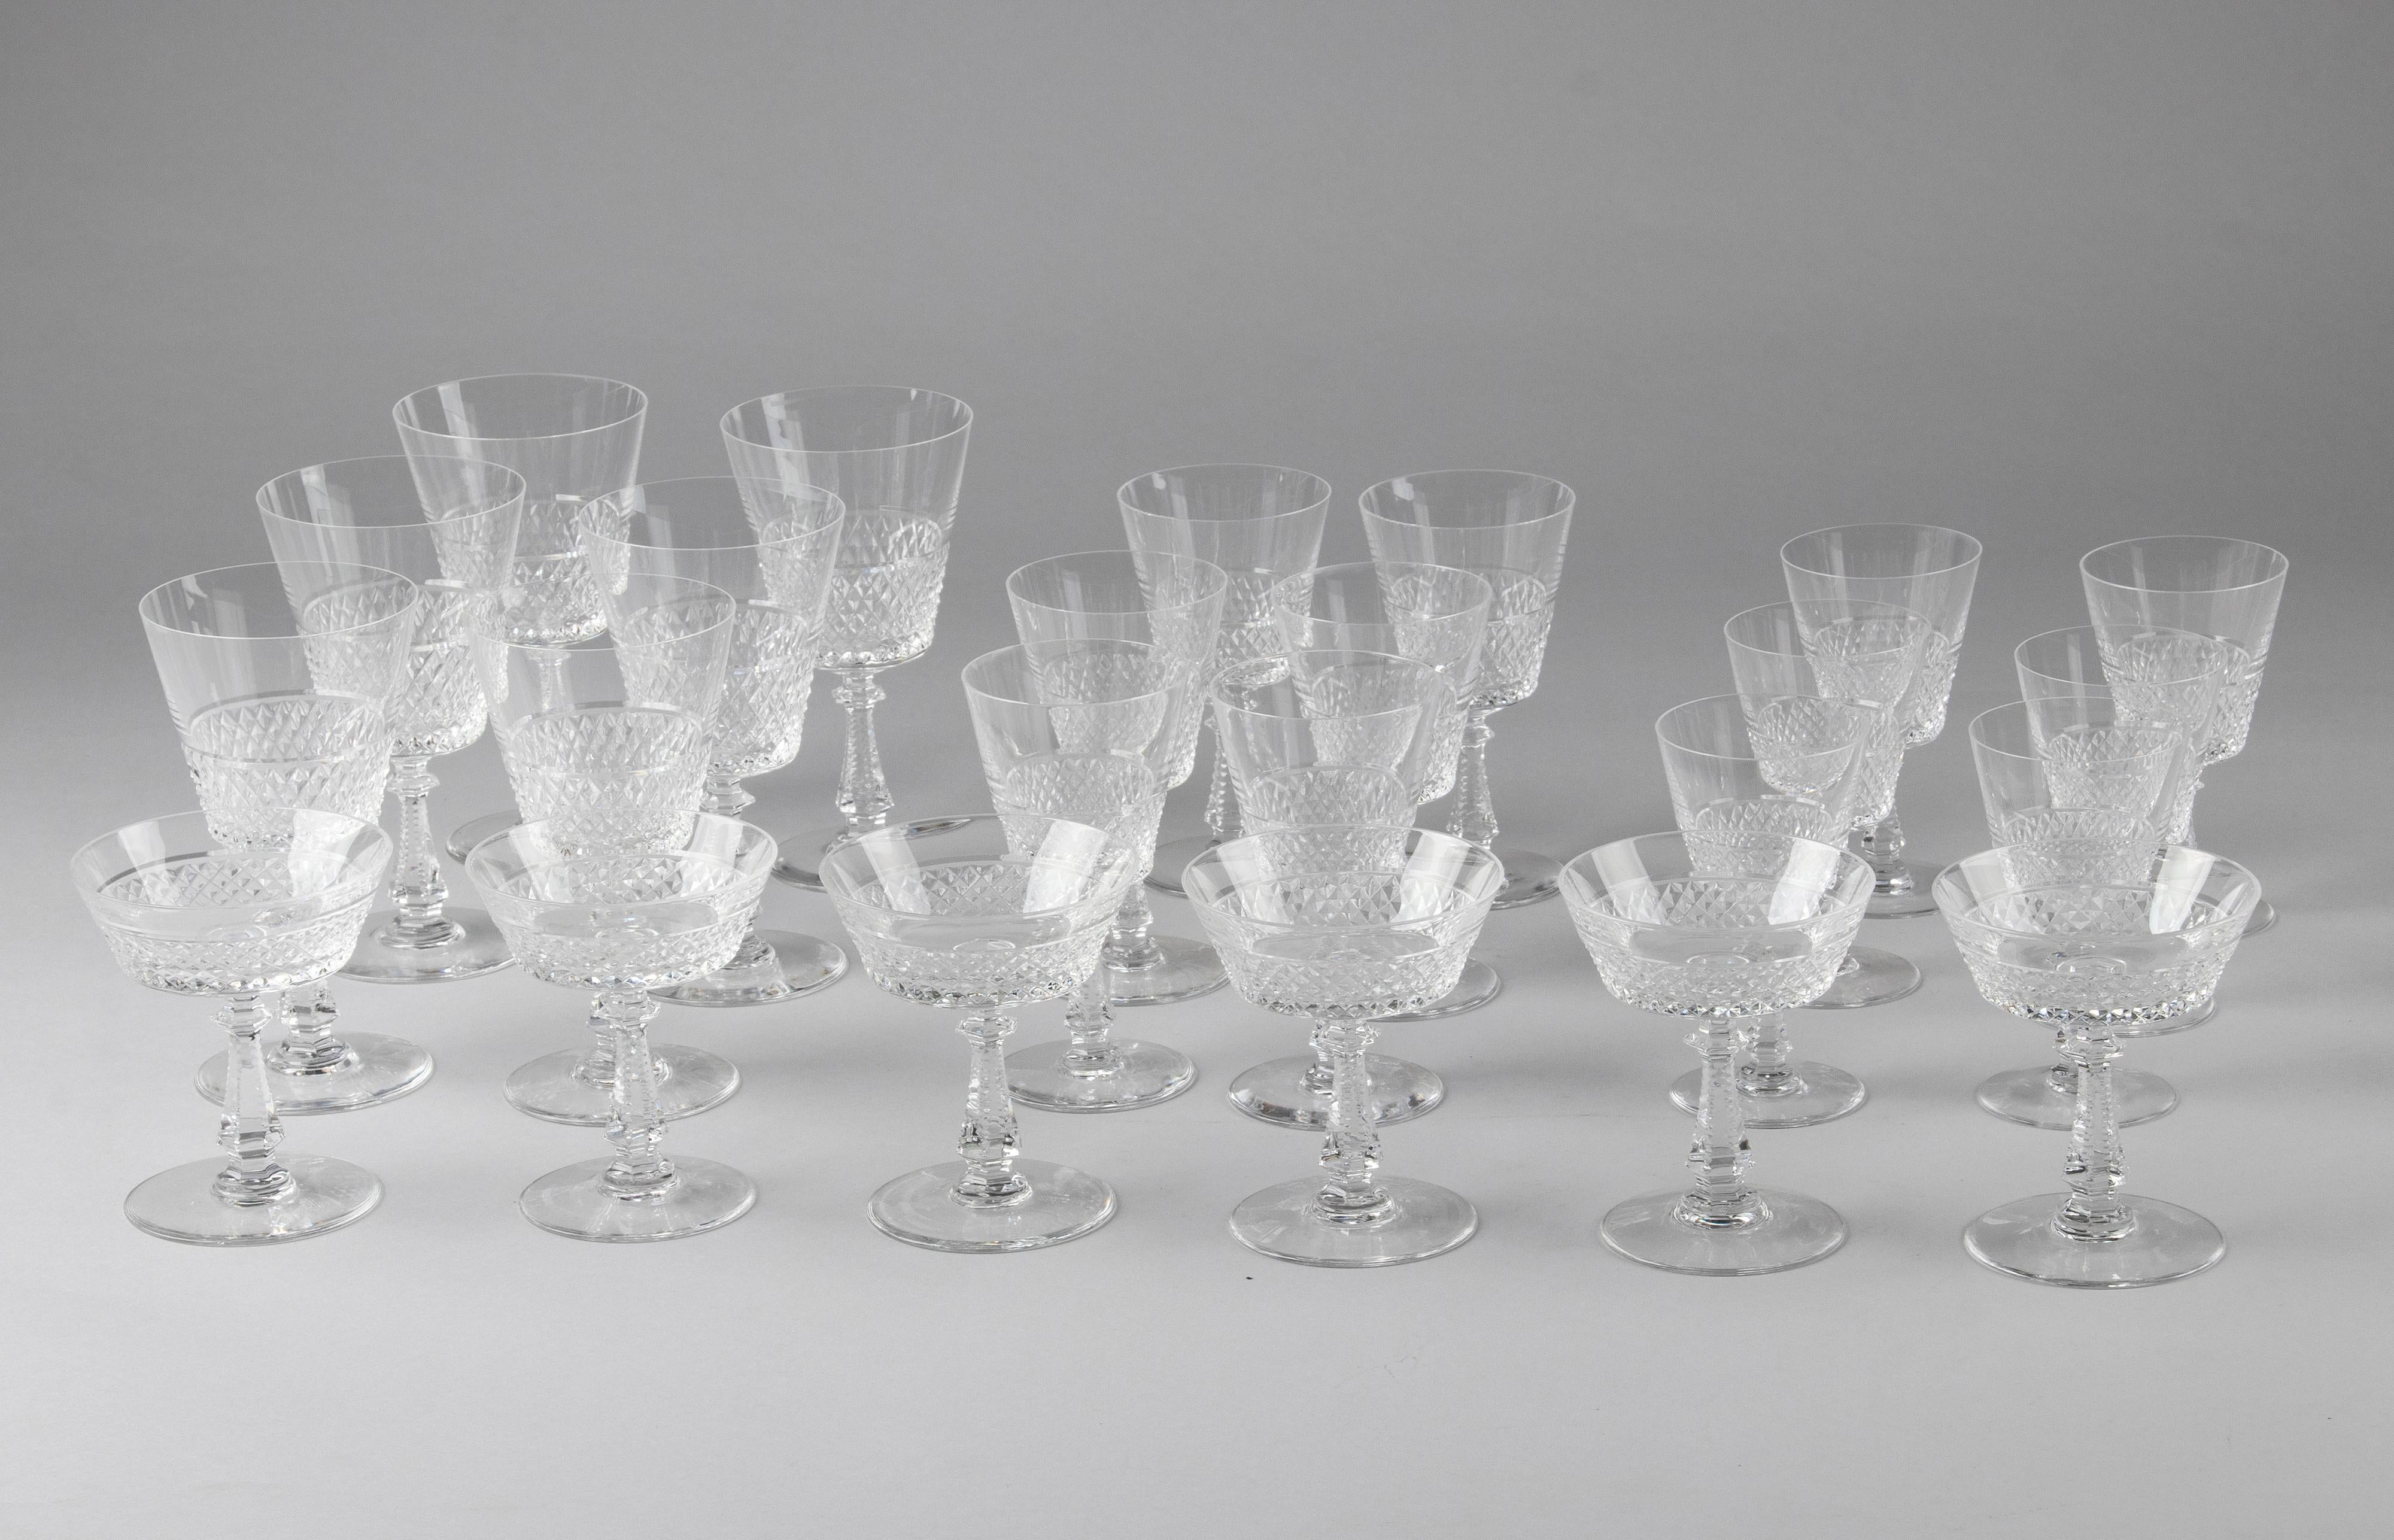 Beautiful set of 24 crystal glasses from the Belgian brand Val Saint Lambert. The glasses have a beautiful cut with a diamond pattern and a beautiful cut stem. The model's name is Heidelberg. Most glasses are signed on the bottom (not all). The